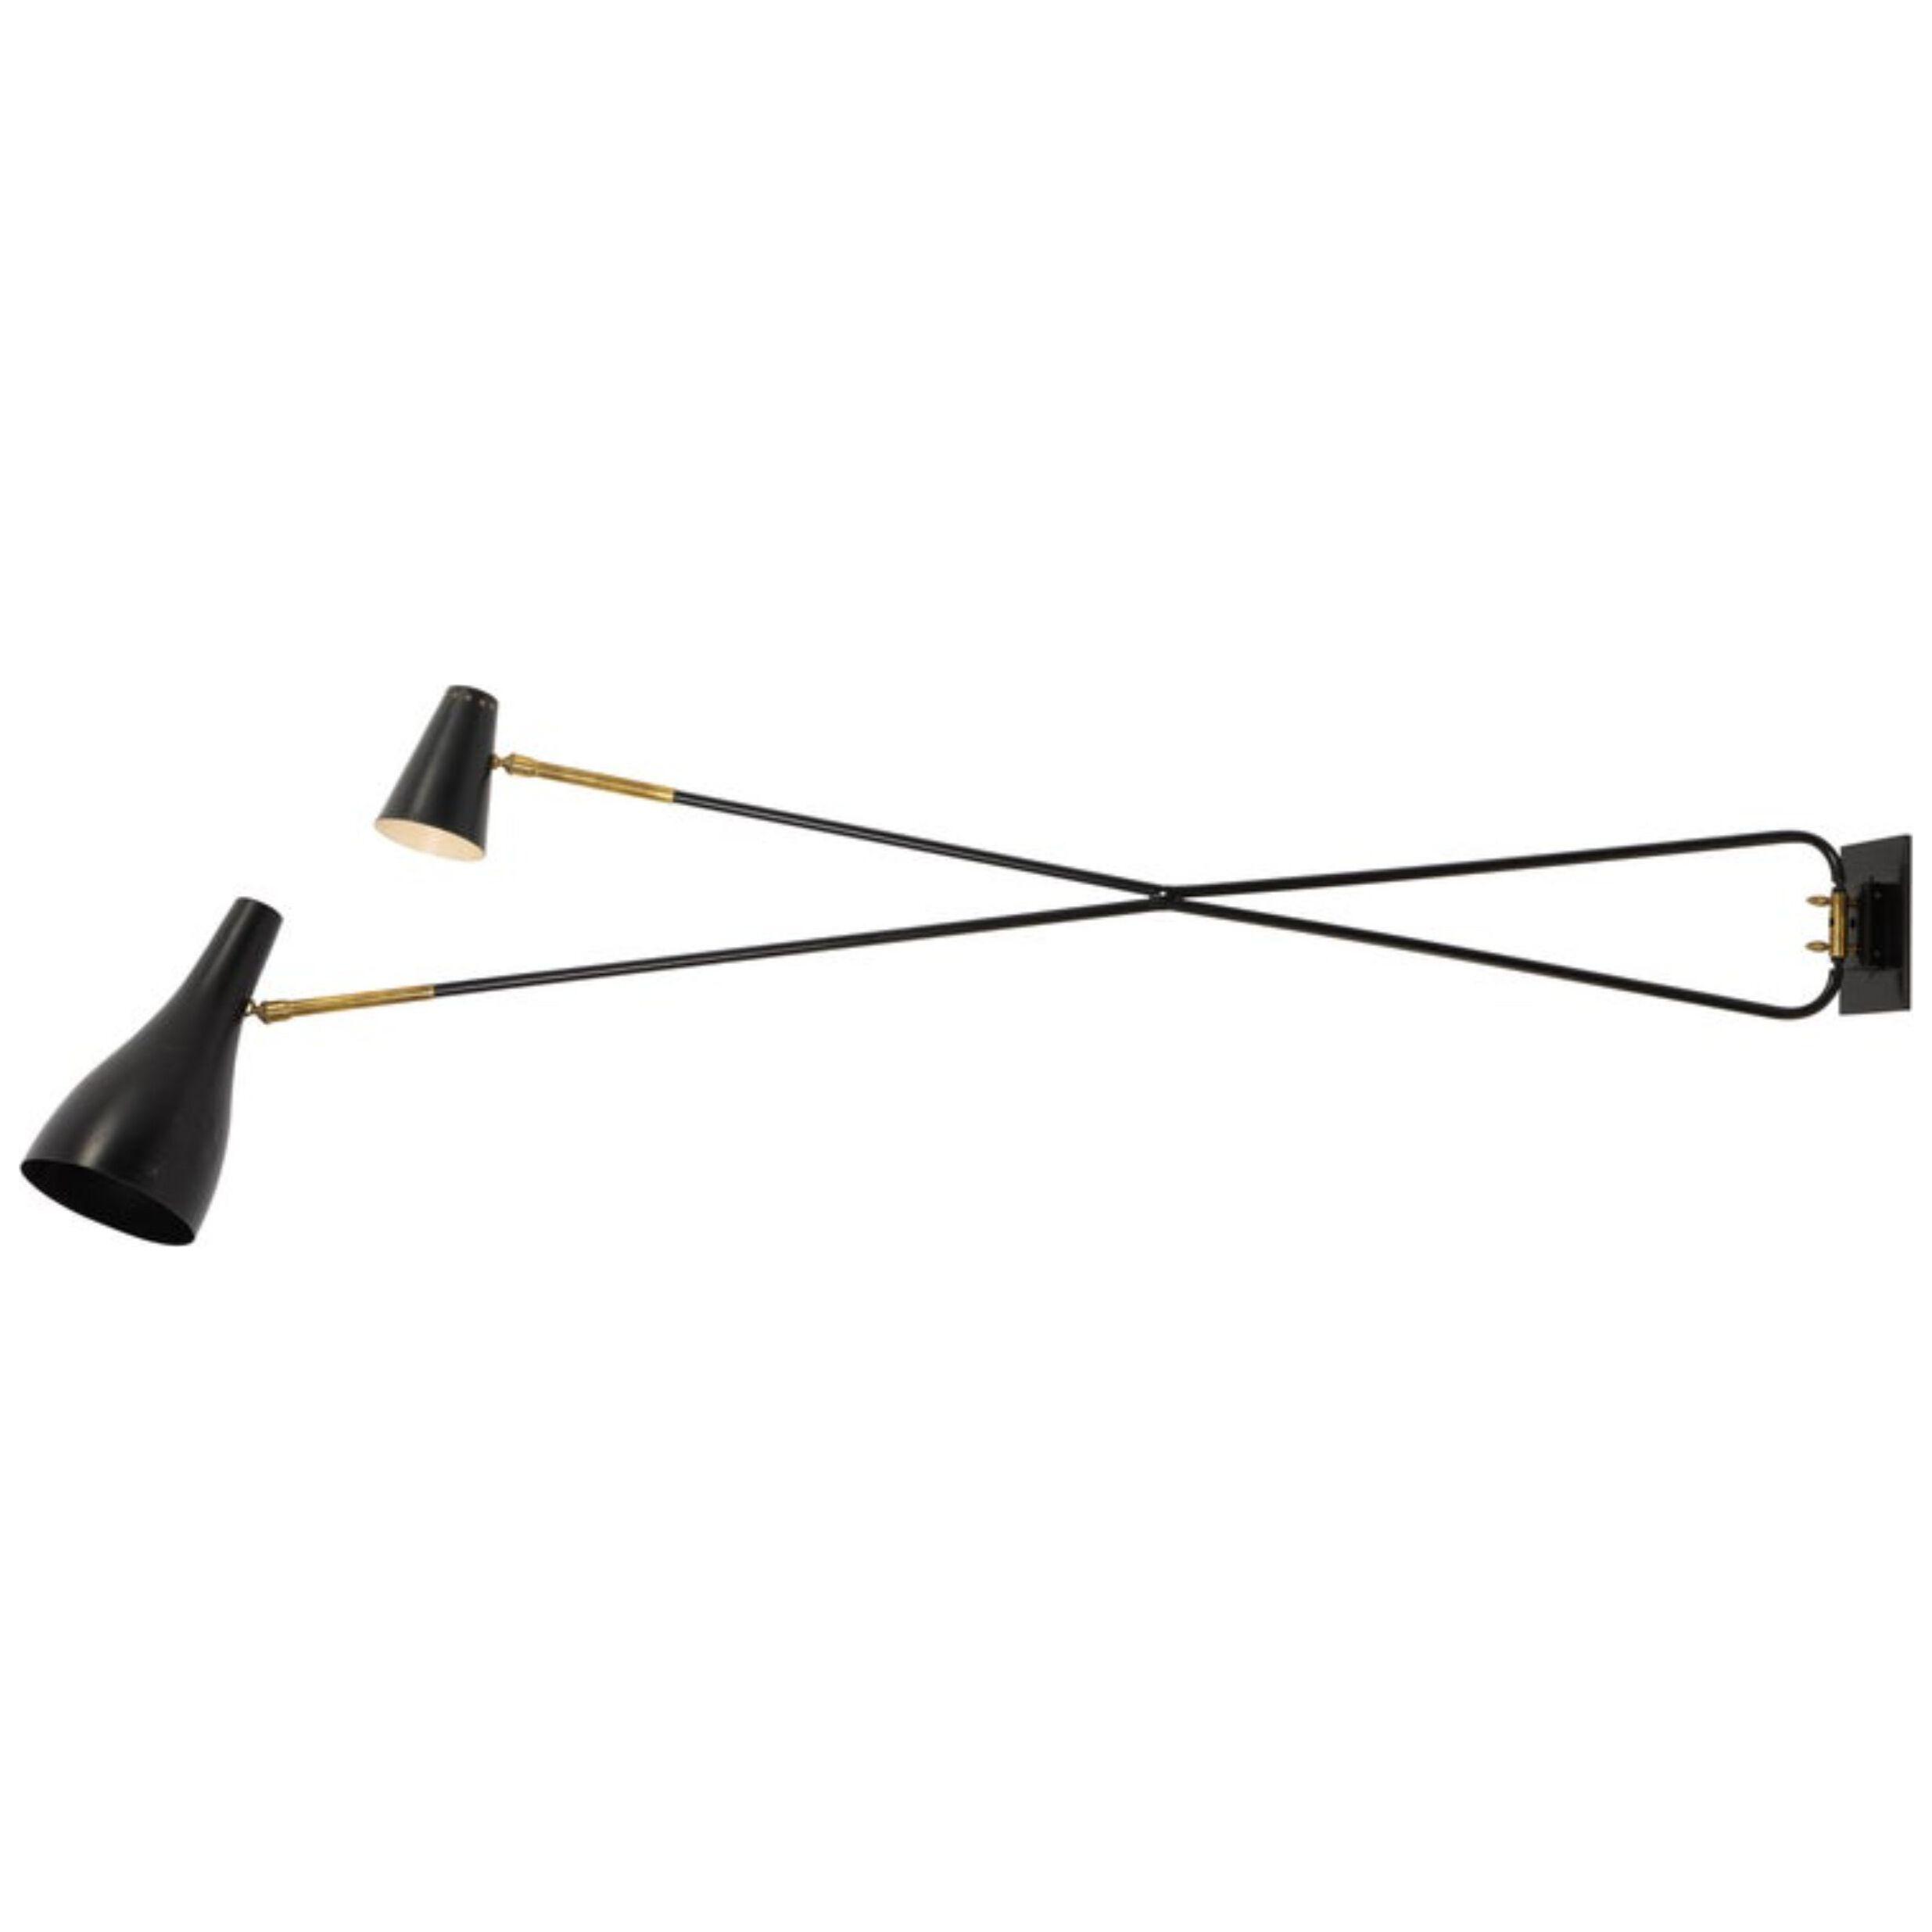 Large Scale Double Swing Arm Sconce by Arlus